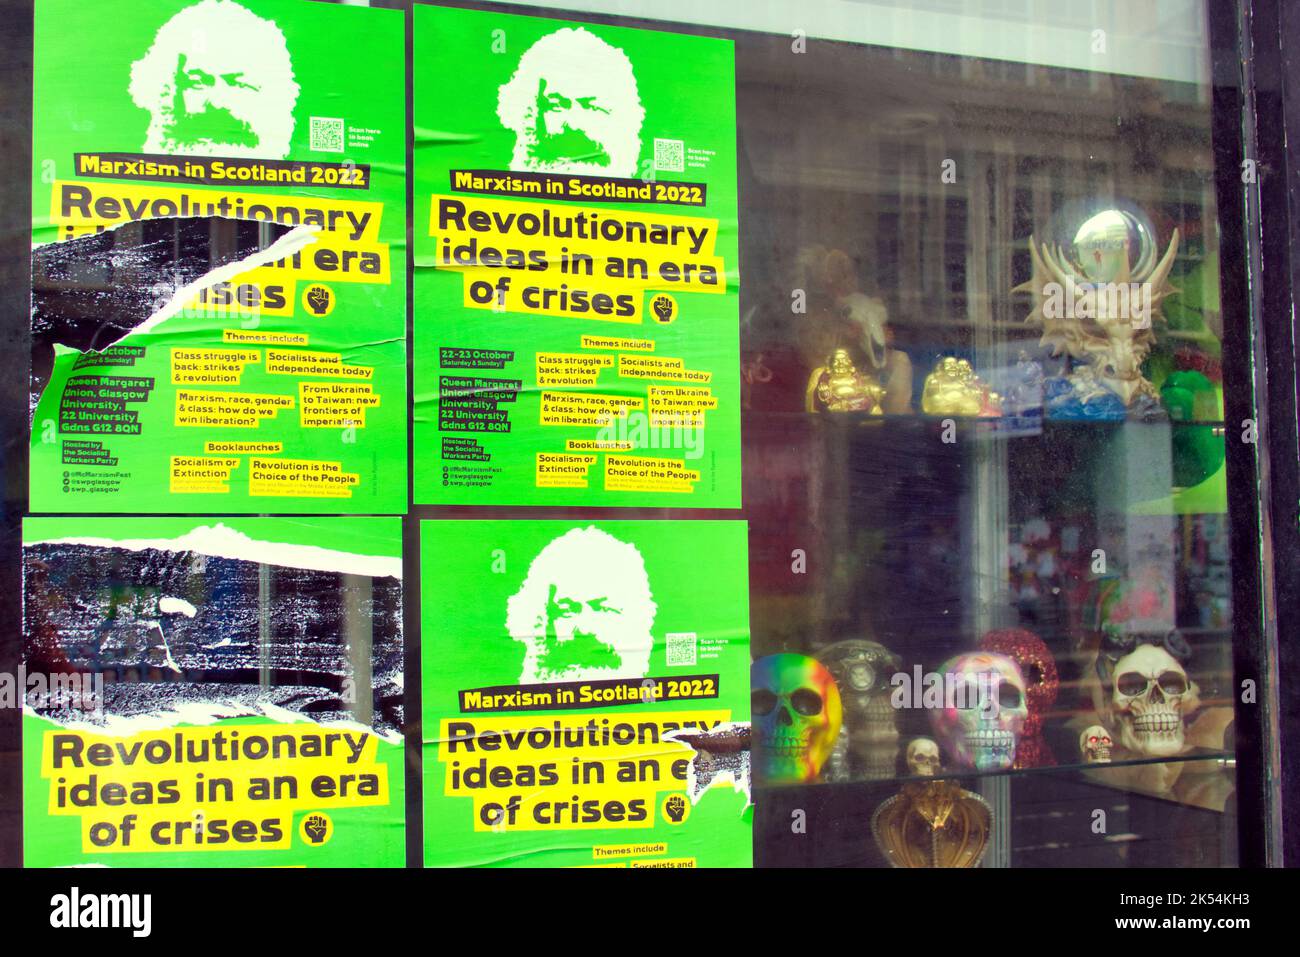 Revolutionary ideas in an era of crises  communist posters against austerity poverty and social injustice Stock Photo